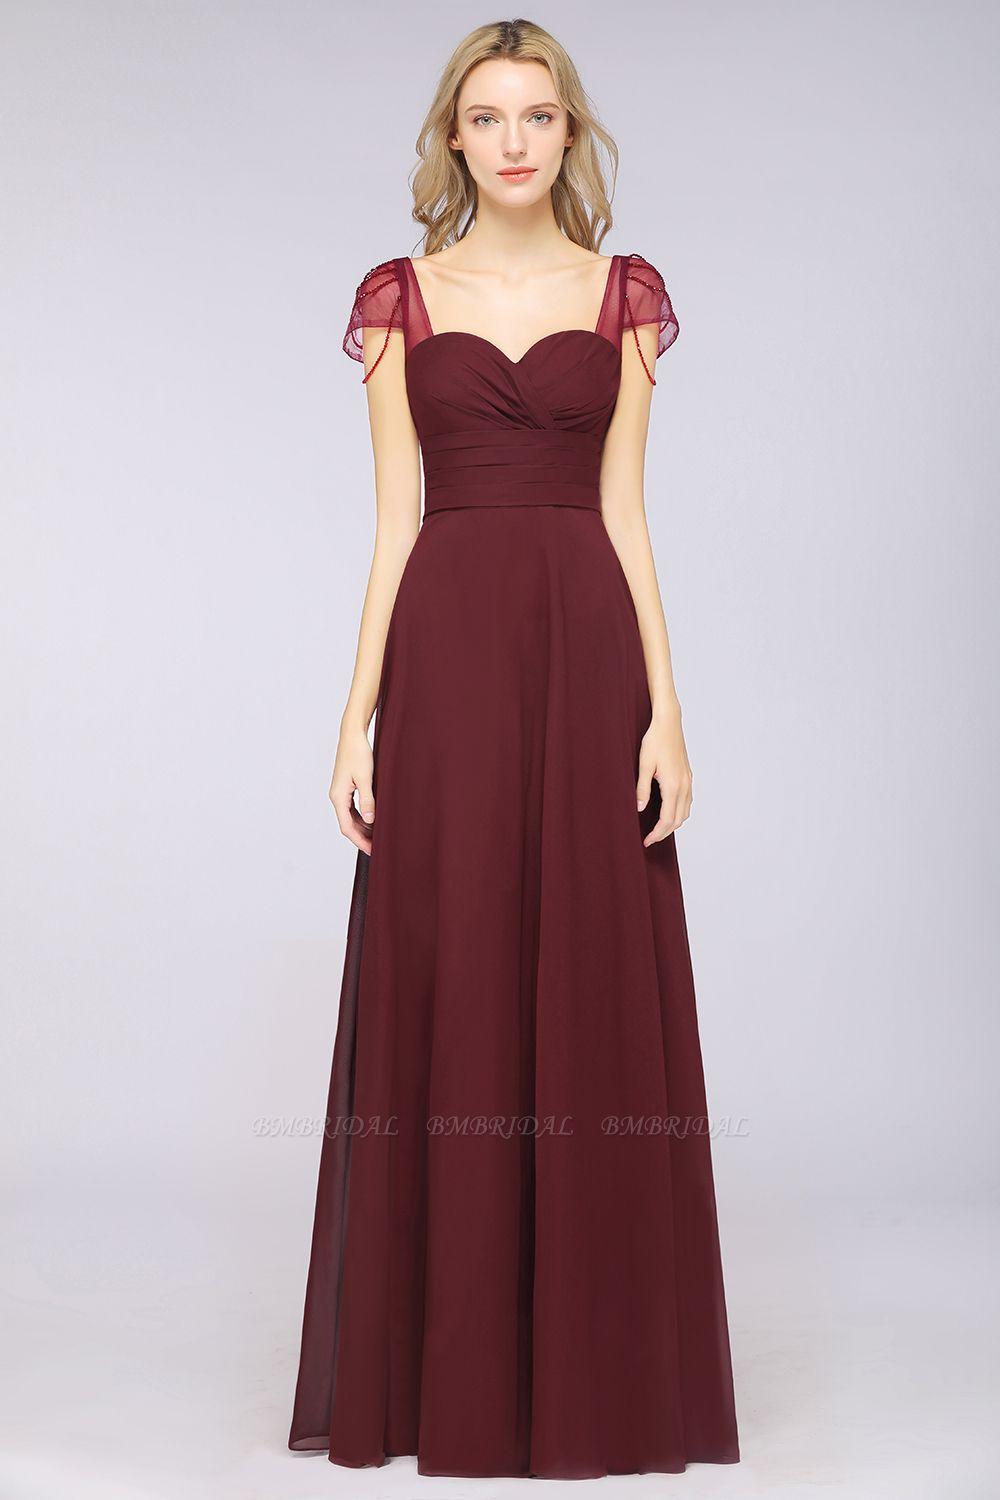 A Good Place To Choose The Bridesmaid Dresses Complementing Any Wedding